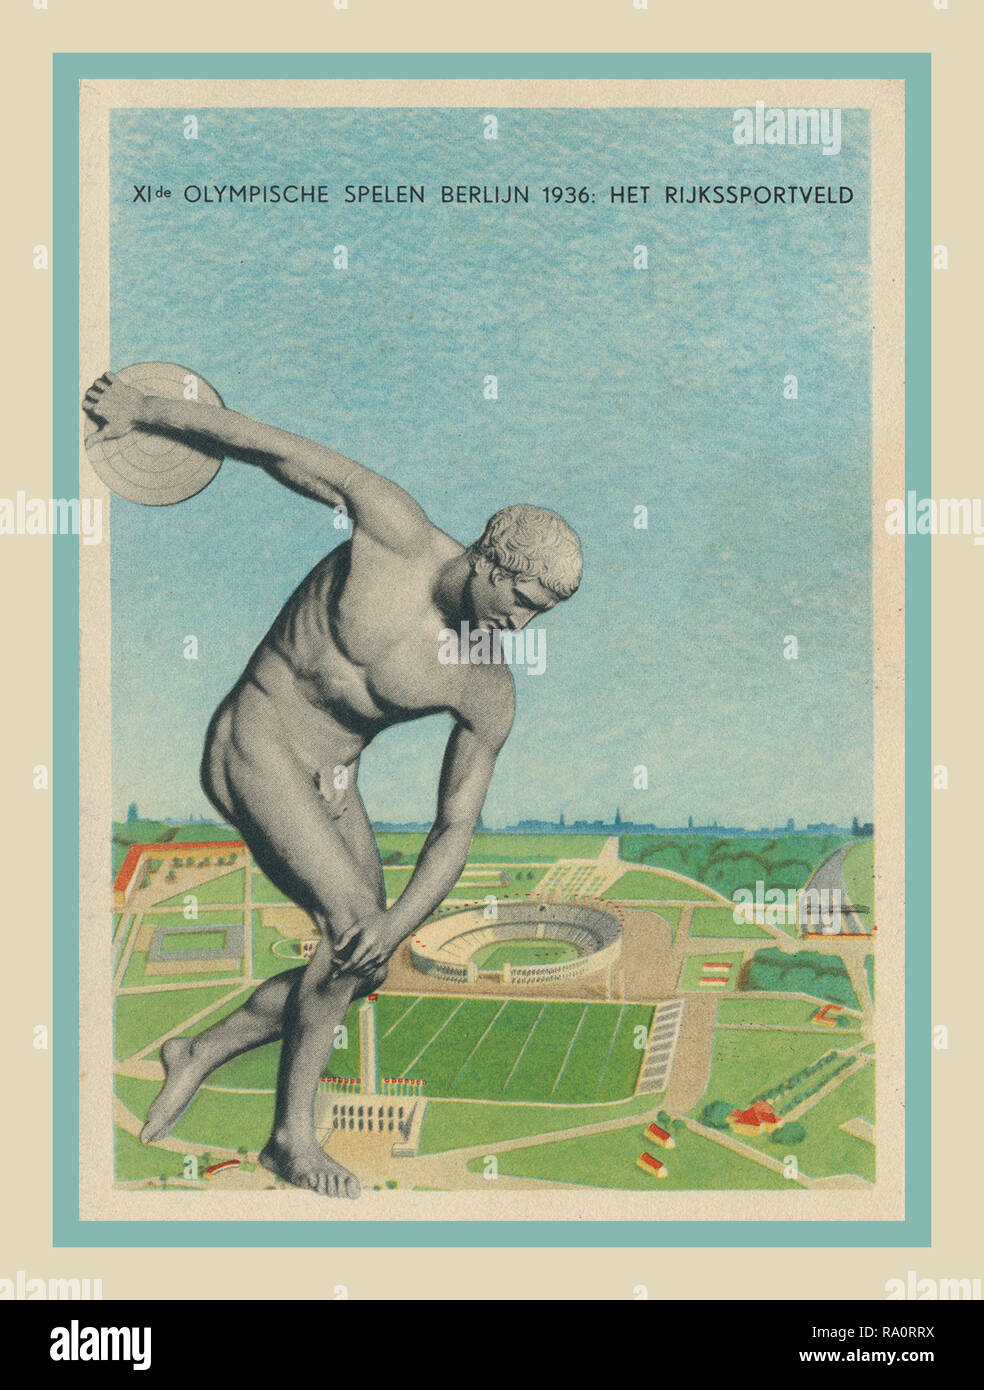 Vintage 1936 Olympic Postcard from Nazi Germany Berlin Olympic Games depicting the 1936 Berlin Olympic games complex with traditional discus thrower in the foreground. Stock Photo